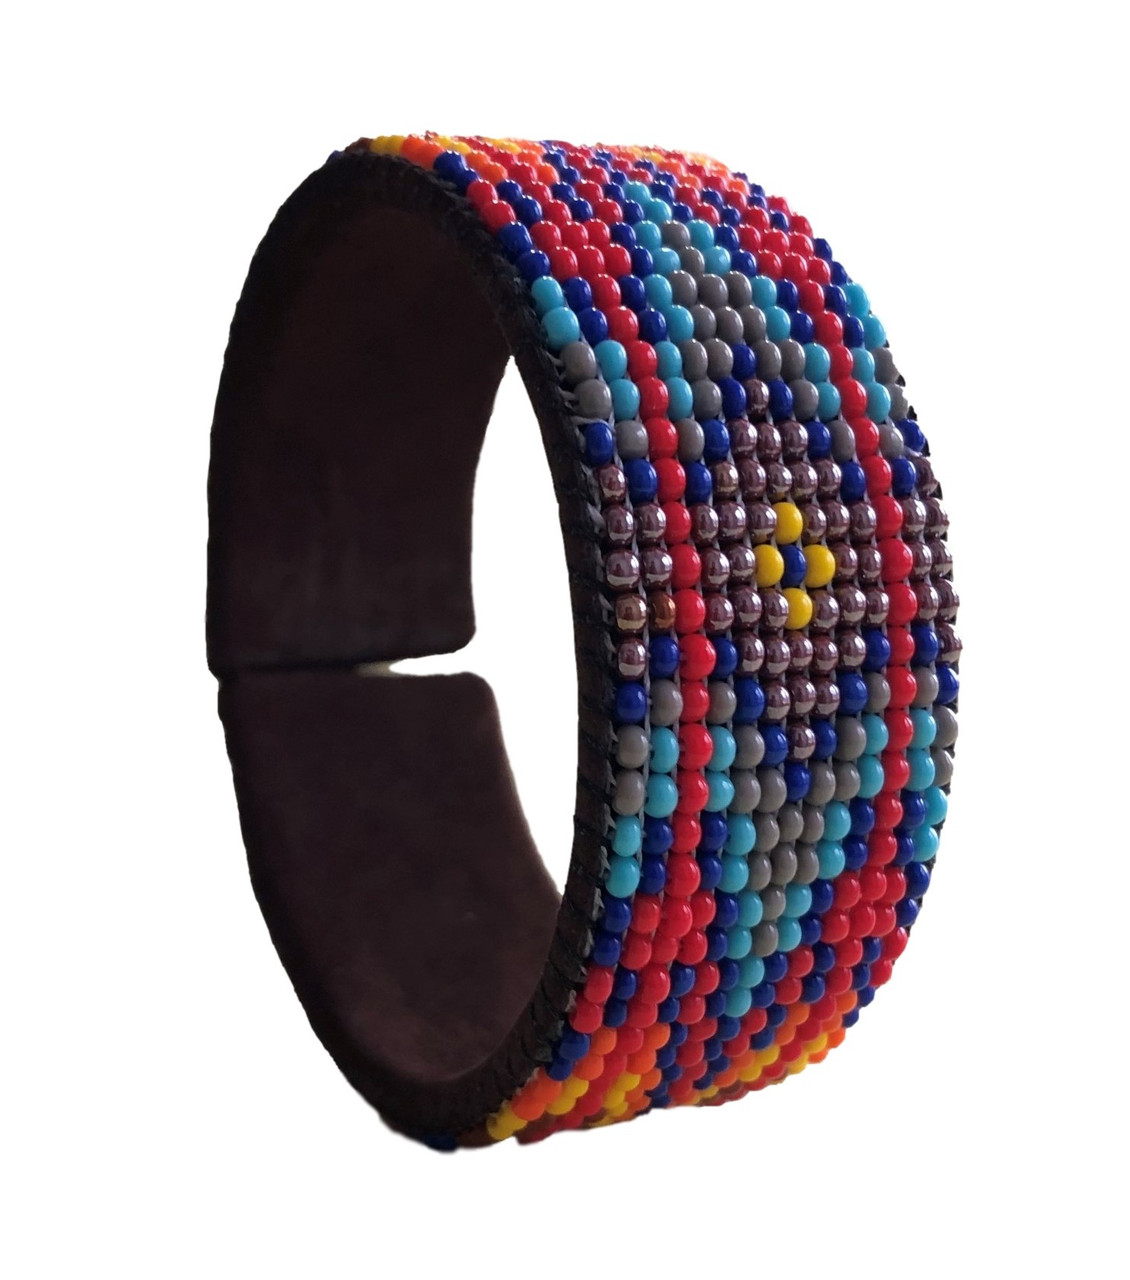 Luminous seed beads stitched onto suede leather over adjustable cuff – one size fits most. 1” x 5.75”